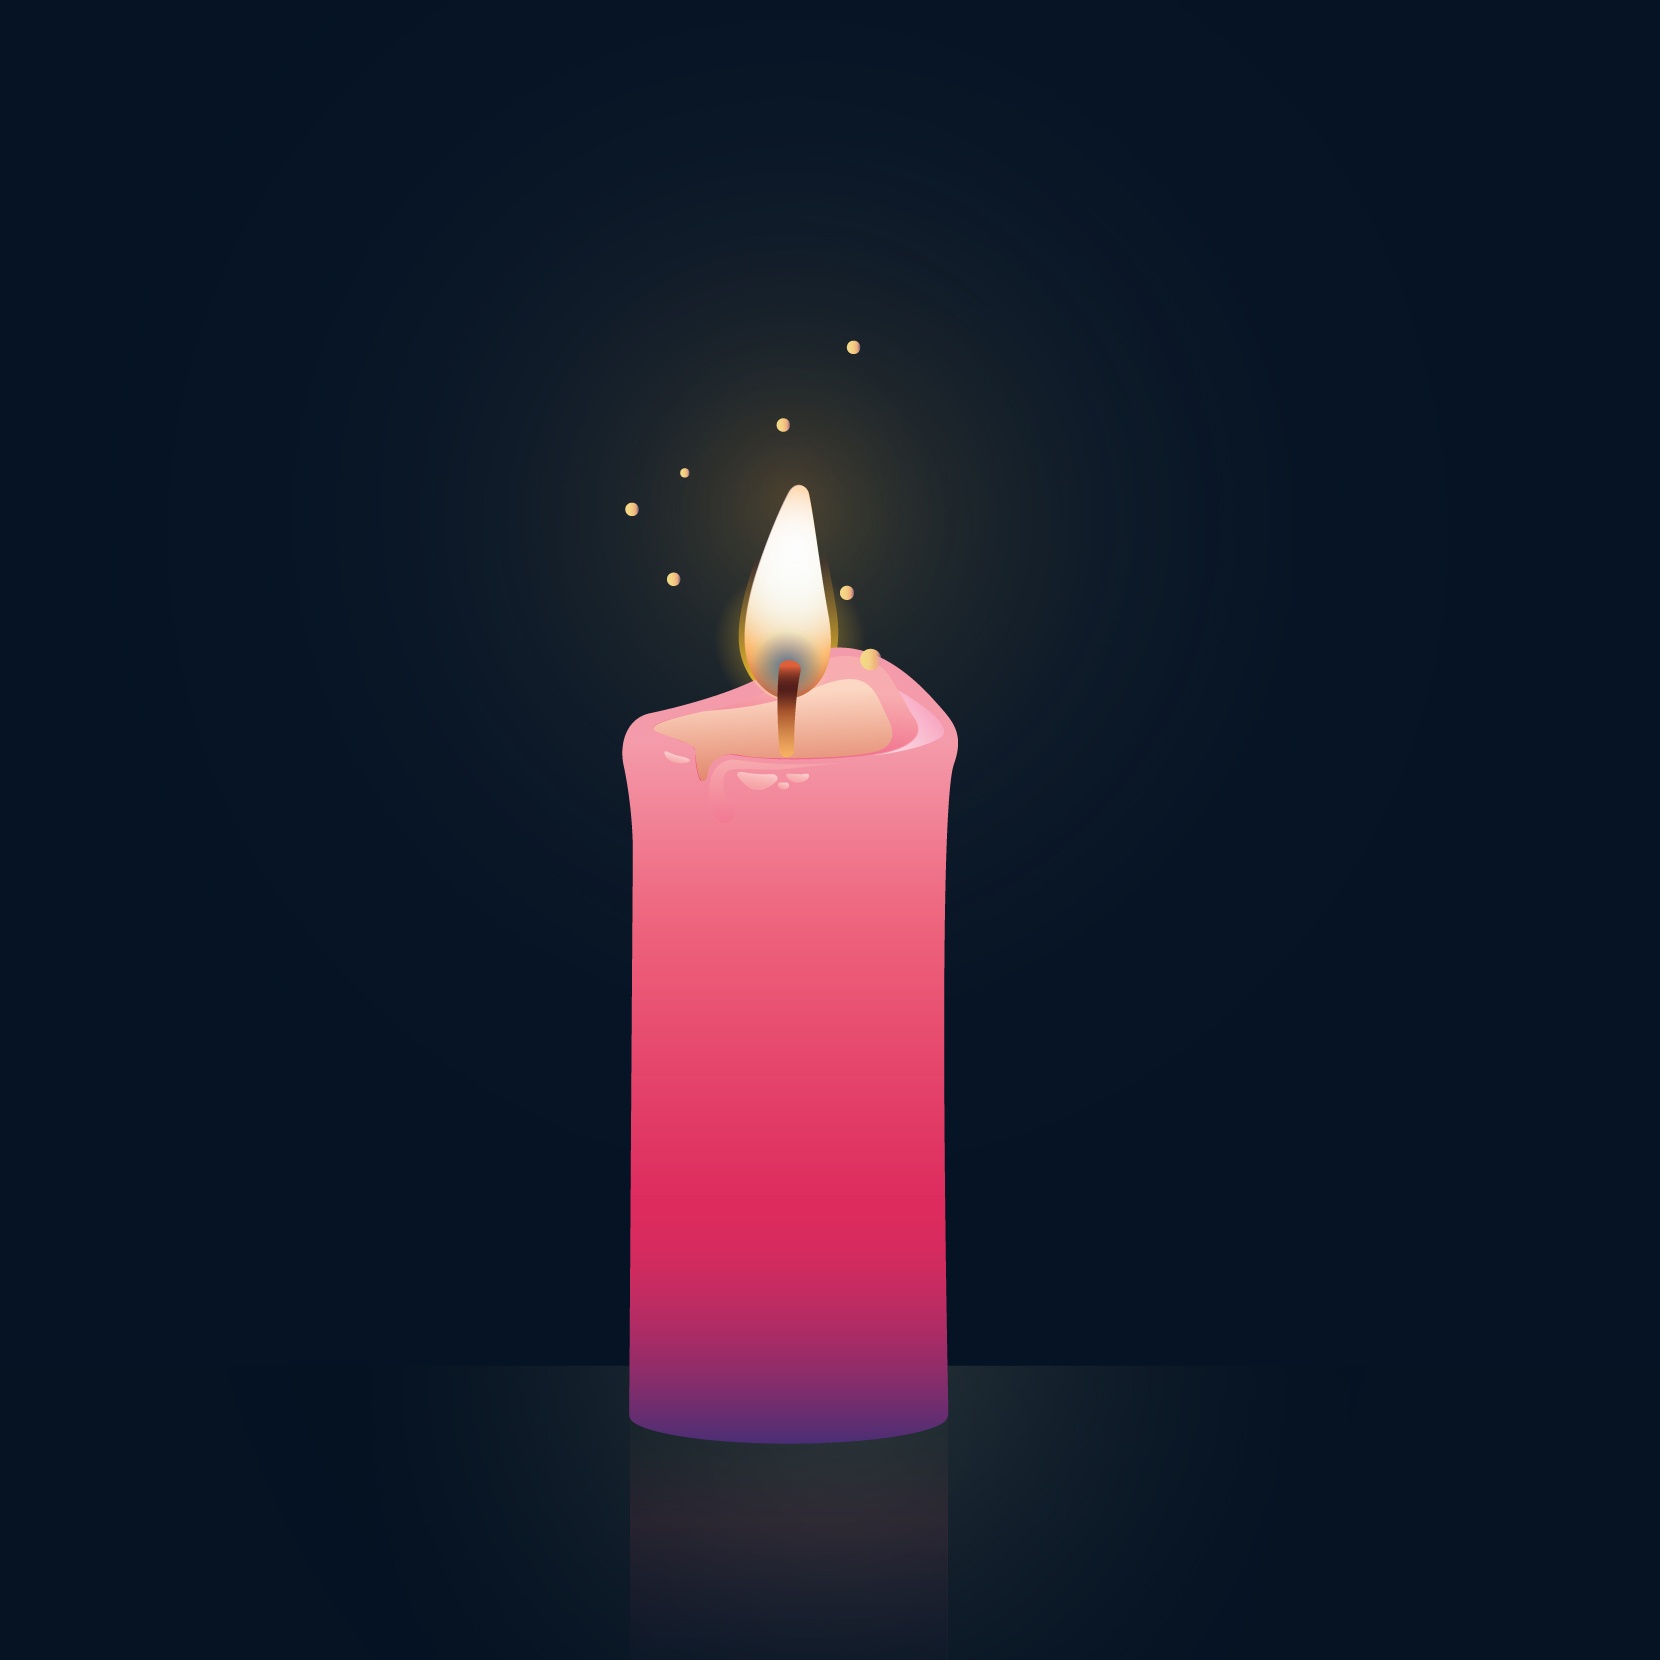 Seven traditions for the heart of Advent